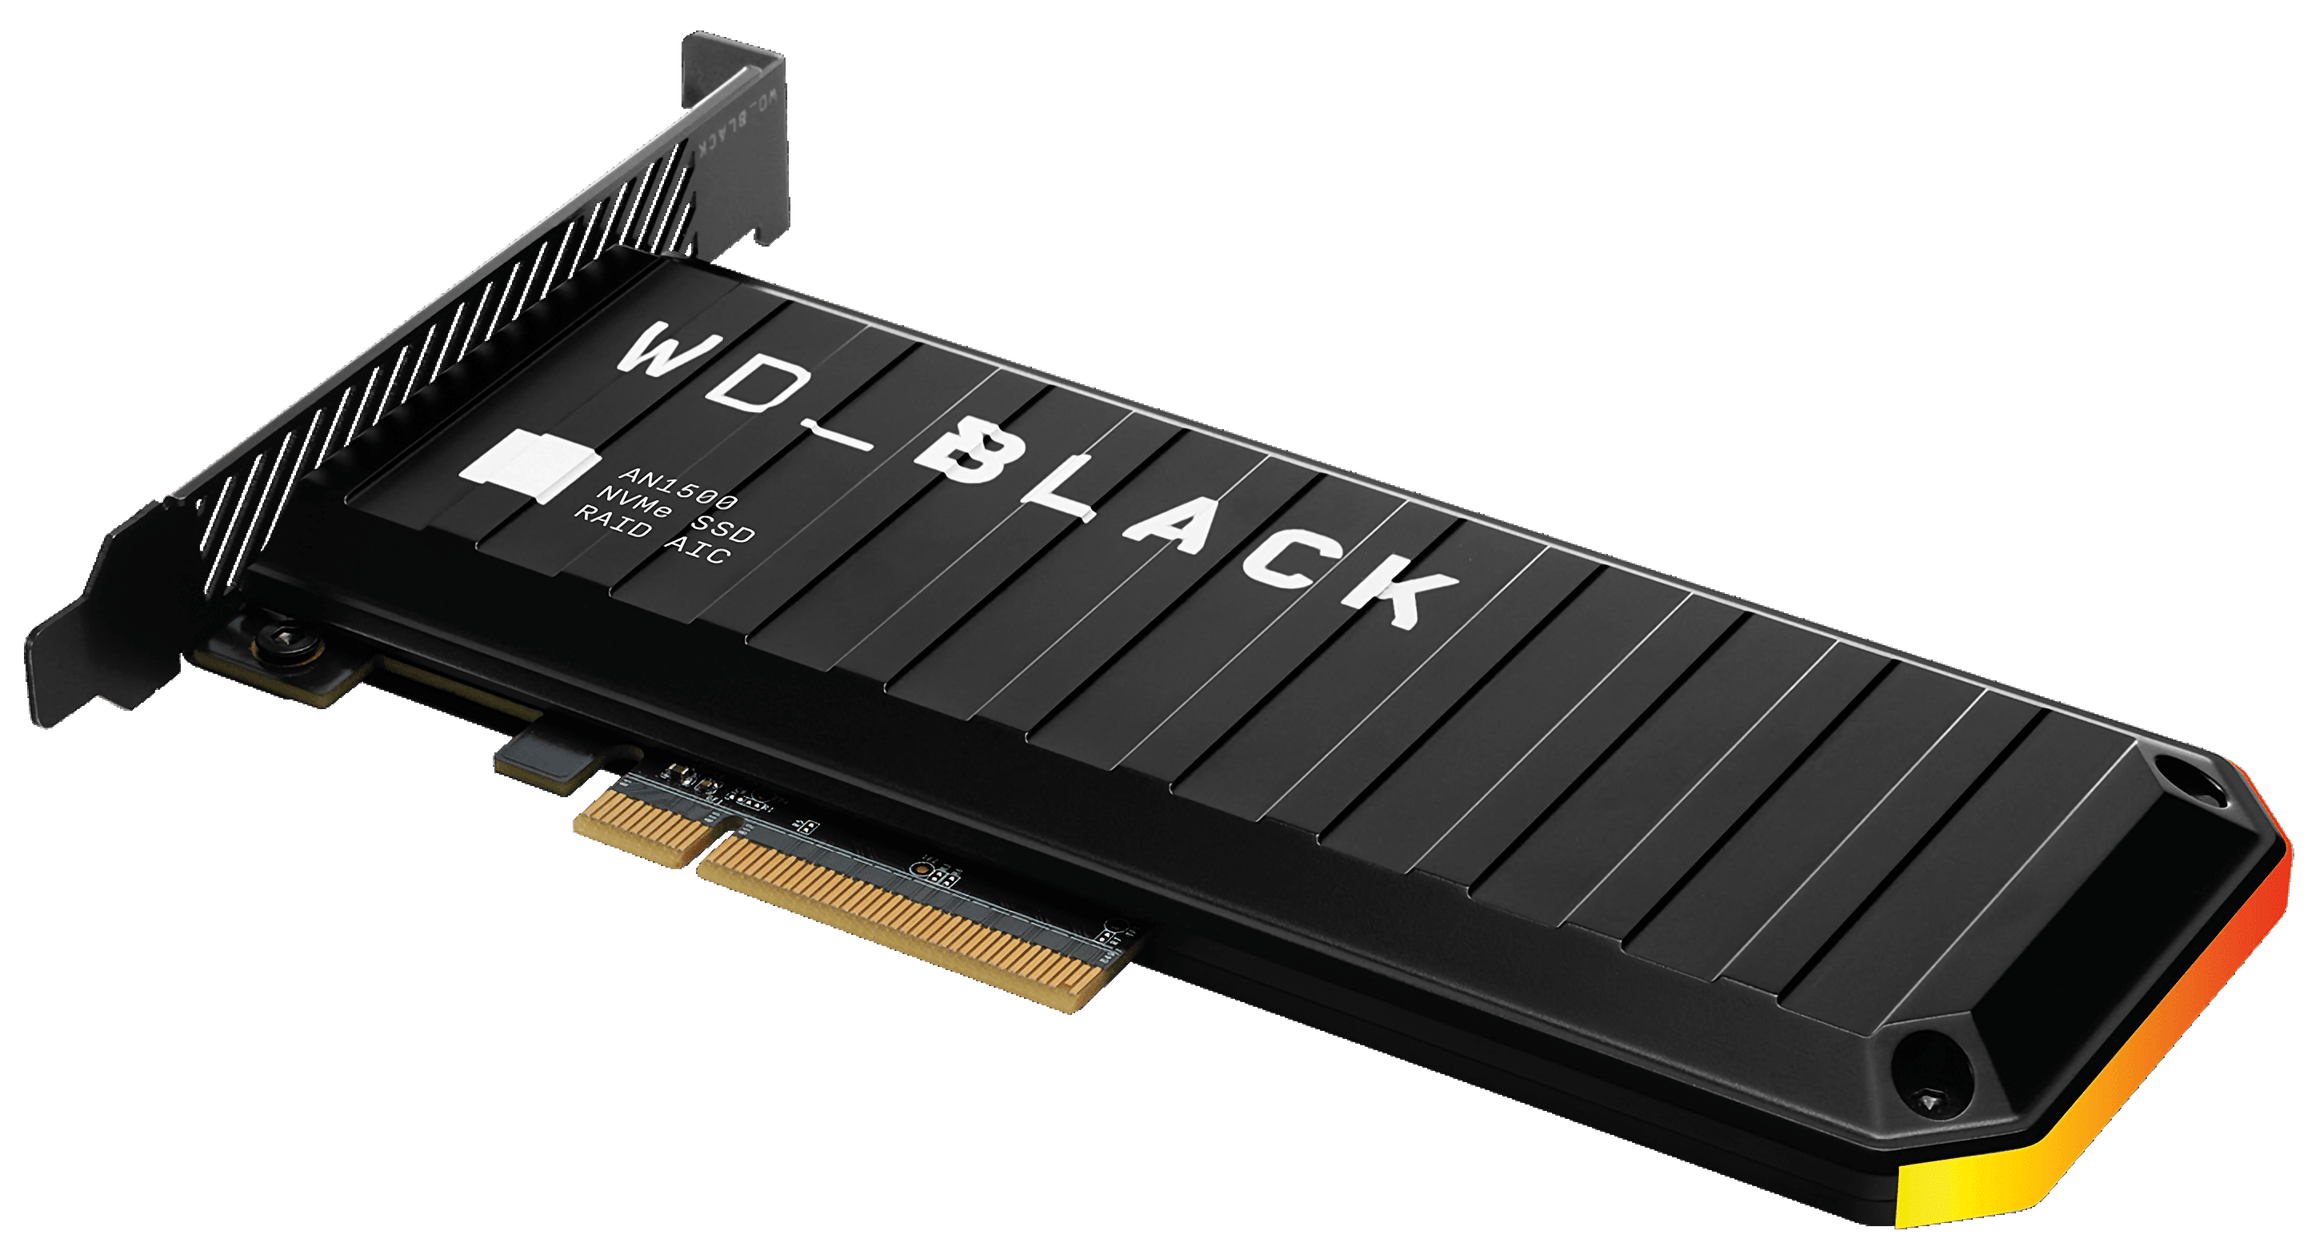 Western Digital's first PCIe 4.0 NVMe solid-state drive starts 